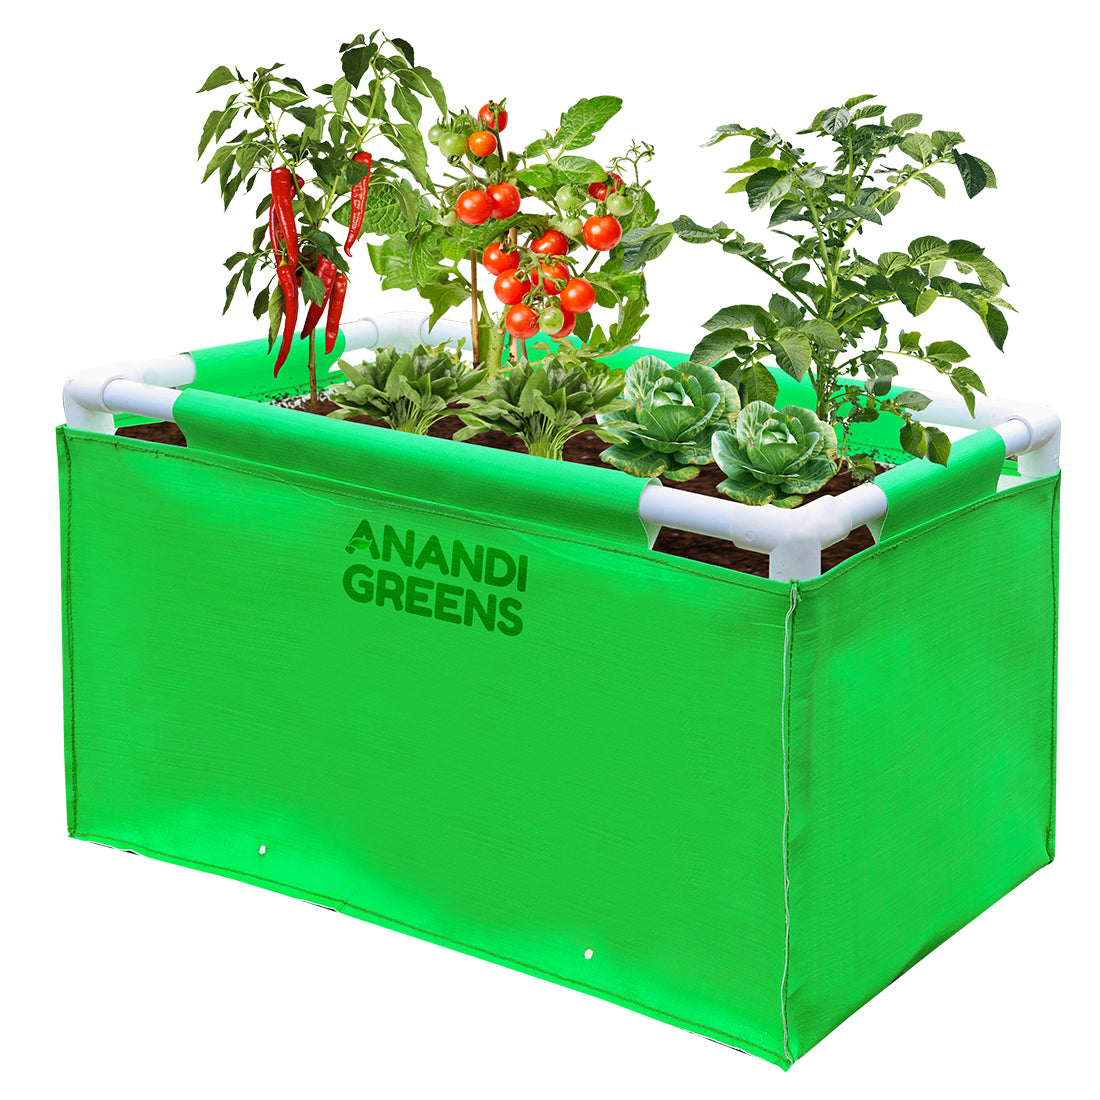 OrganicBazar 350 GSM Rectangle Grow Bag with Supporting PVC Pipes Terrace Gardening  Vegetable Planting Grow Bags